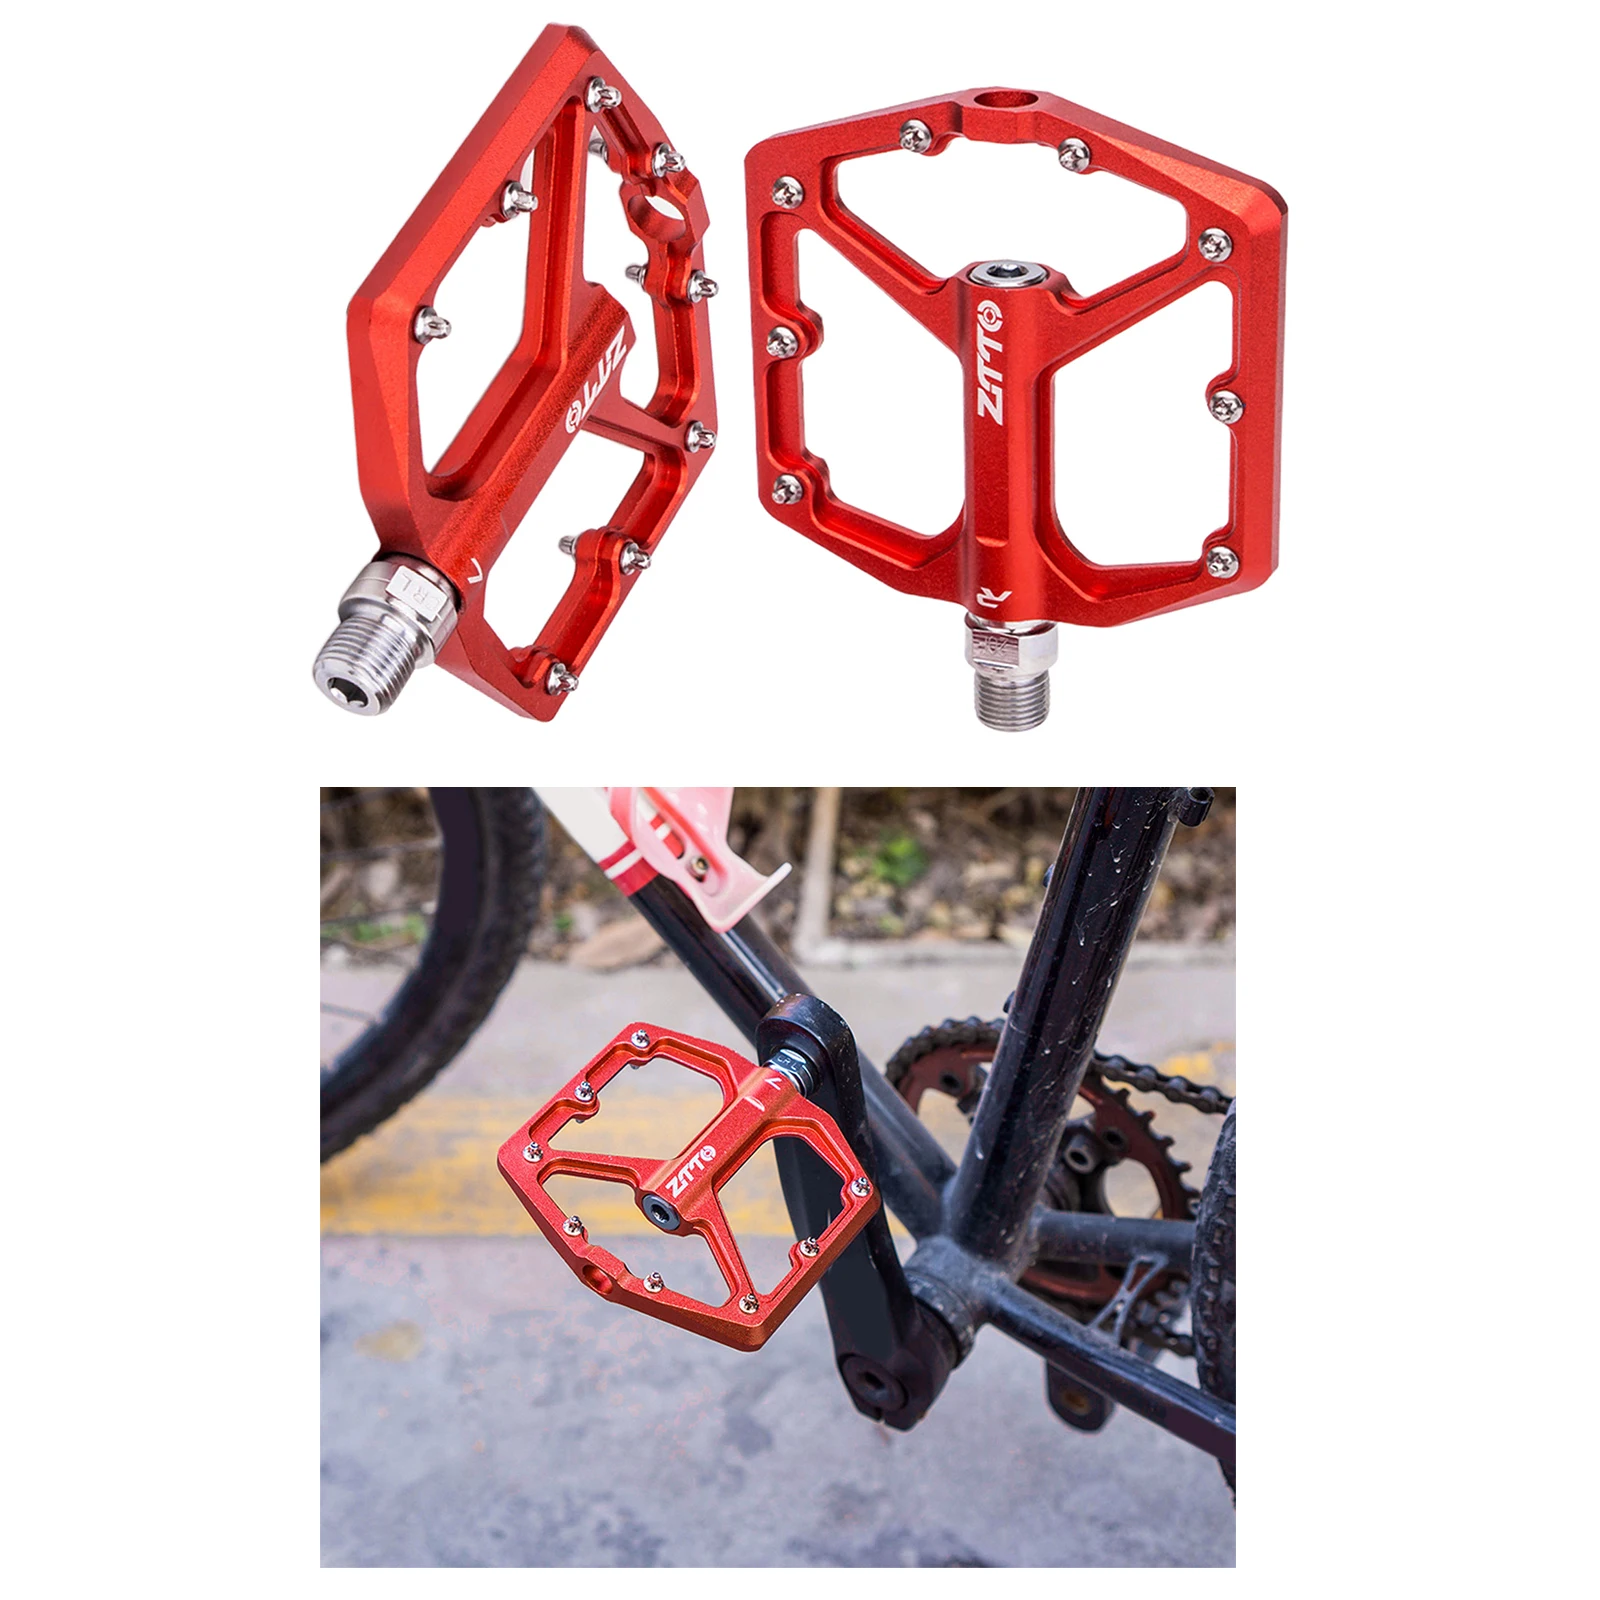 CNC Aluminum Alloy Sealed Bearing Anti-slip Bicycle Pedals flat Platform Pedals Ultralight Mountain Bike MTB Bicycle Parts